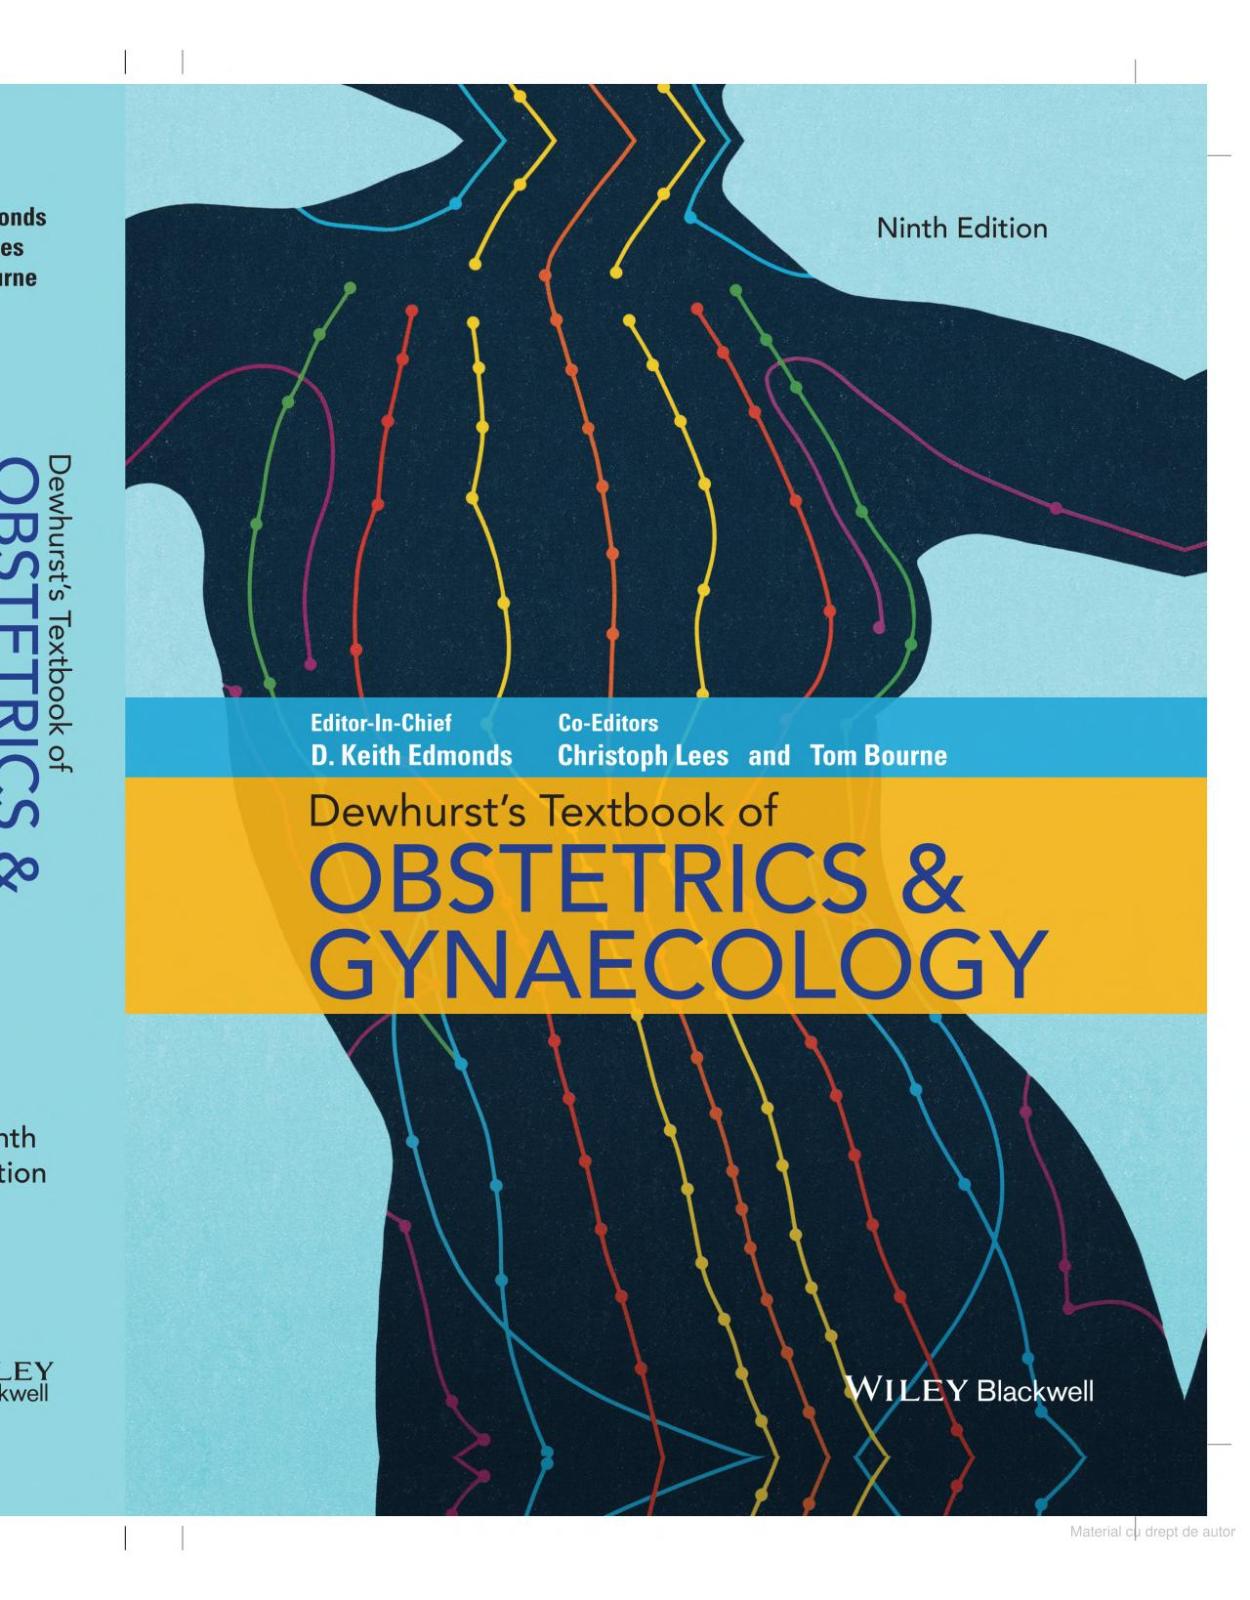 Dewhurst′s Textbook of Obstetrics & Gynaecology 9e